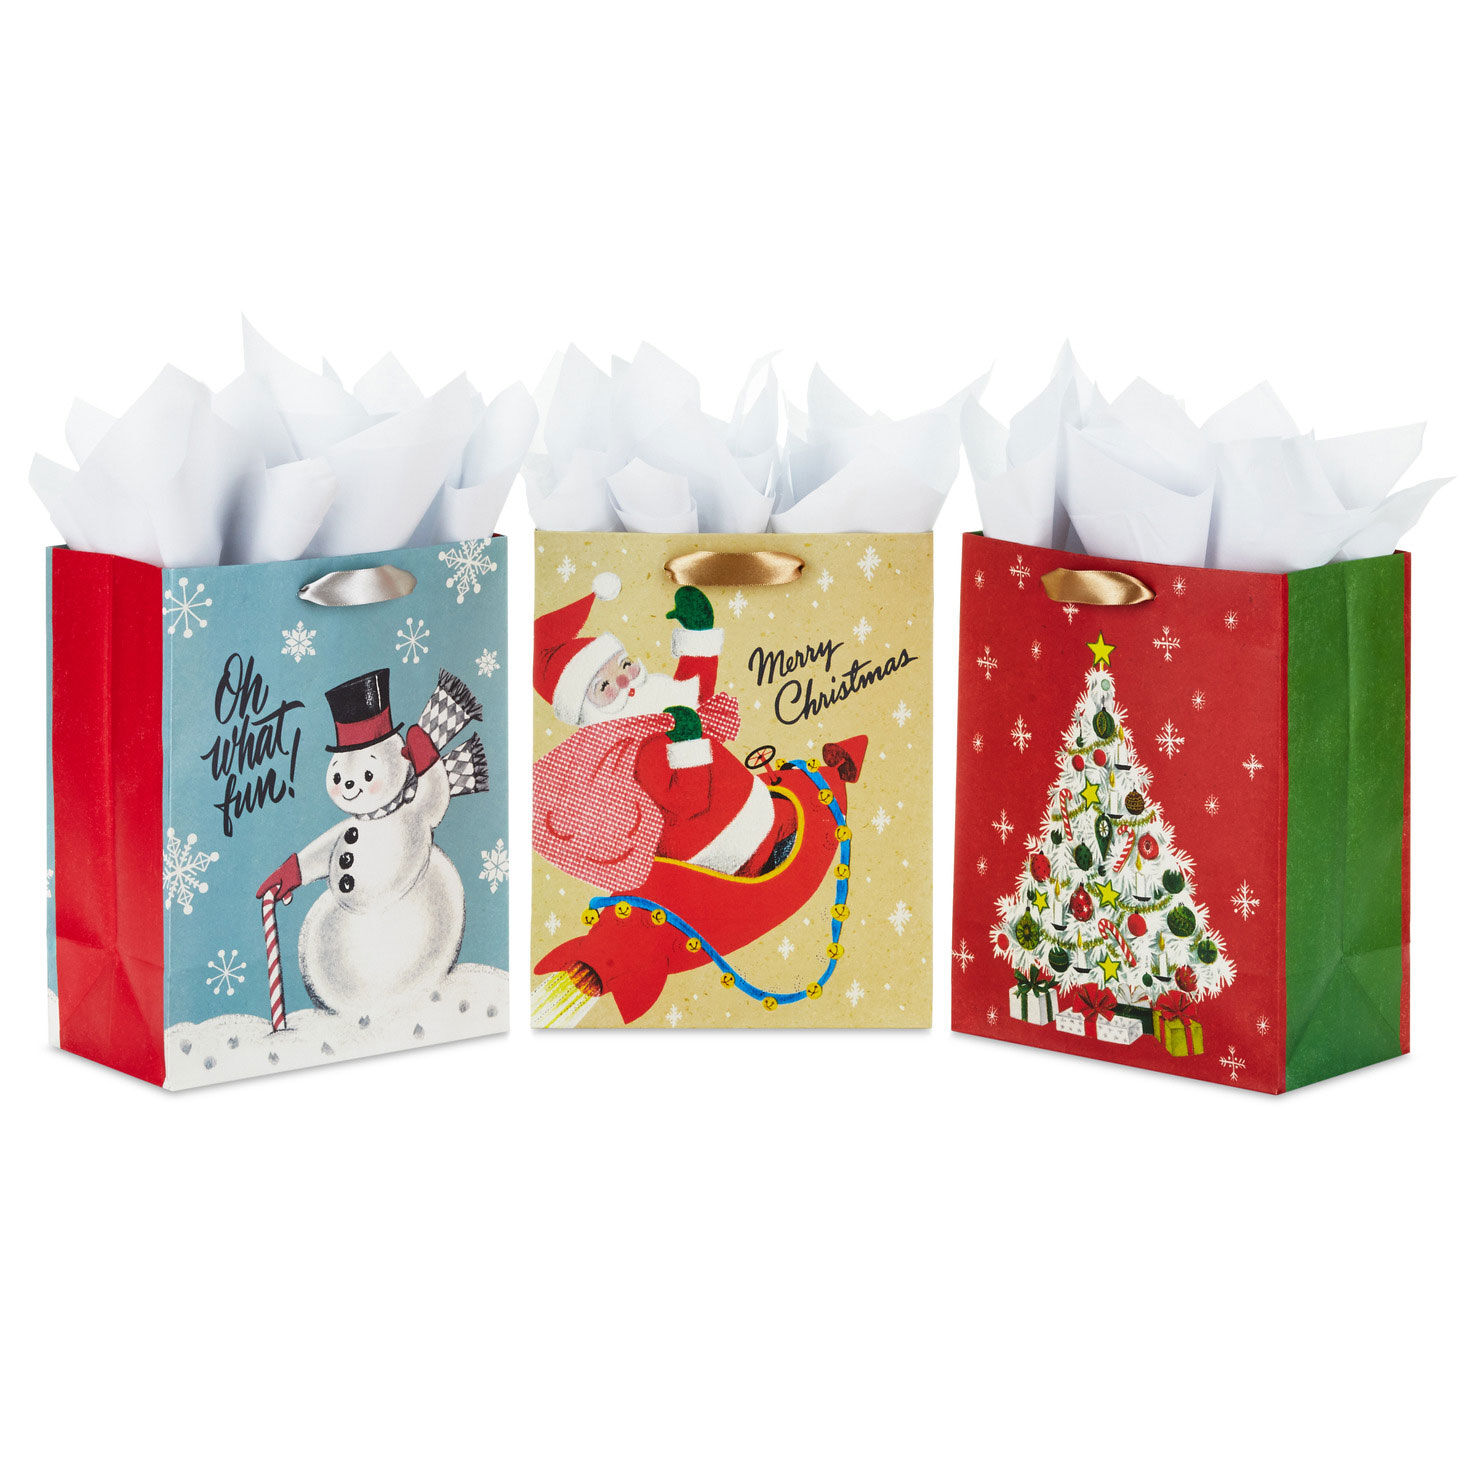 https://www.hallmark.com/dw/image/v2/AALB_PRD/on/demandware.static/-/Sites-hallmark-master/default/dw6bc63d78/images/finished-goods/products/5XGB1426/Assorted-Medium-Christmas-Gift-Bags-With-Tissue_5XGB1426_01.jpg?sfrm=jpg